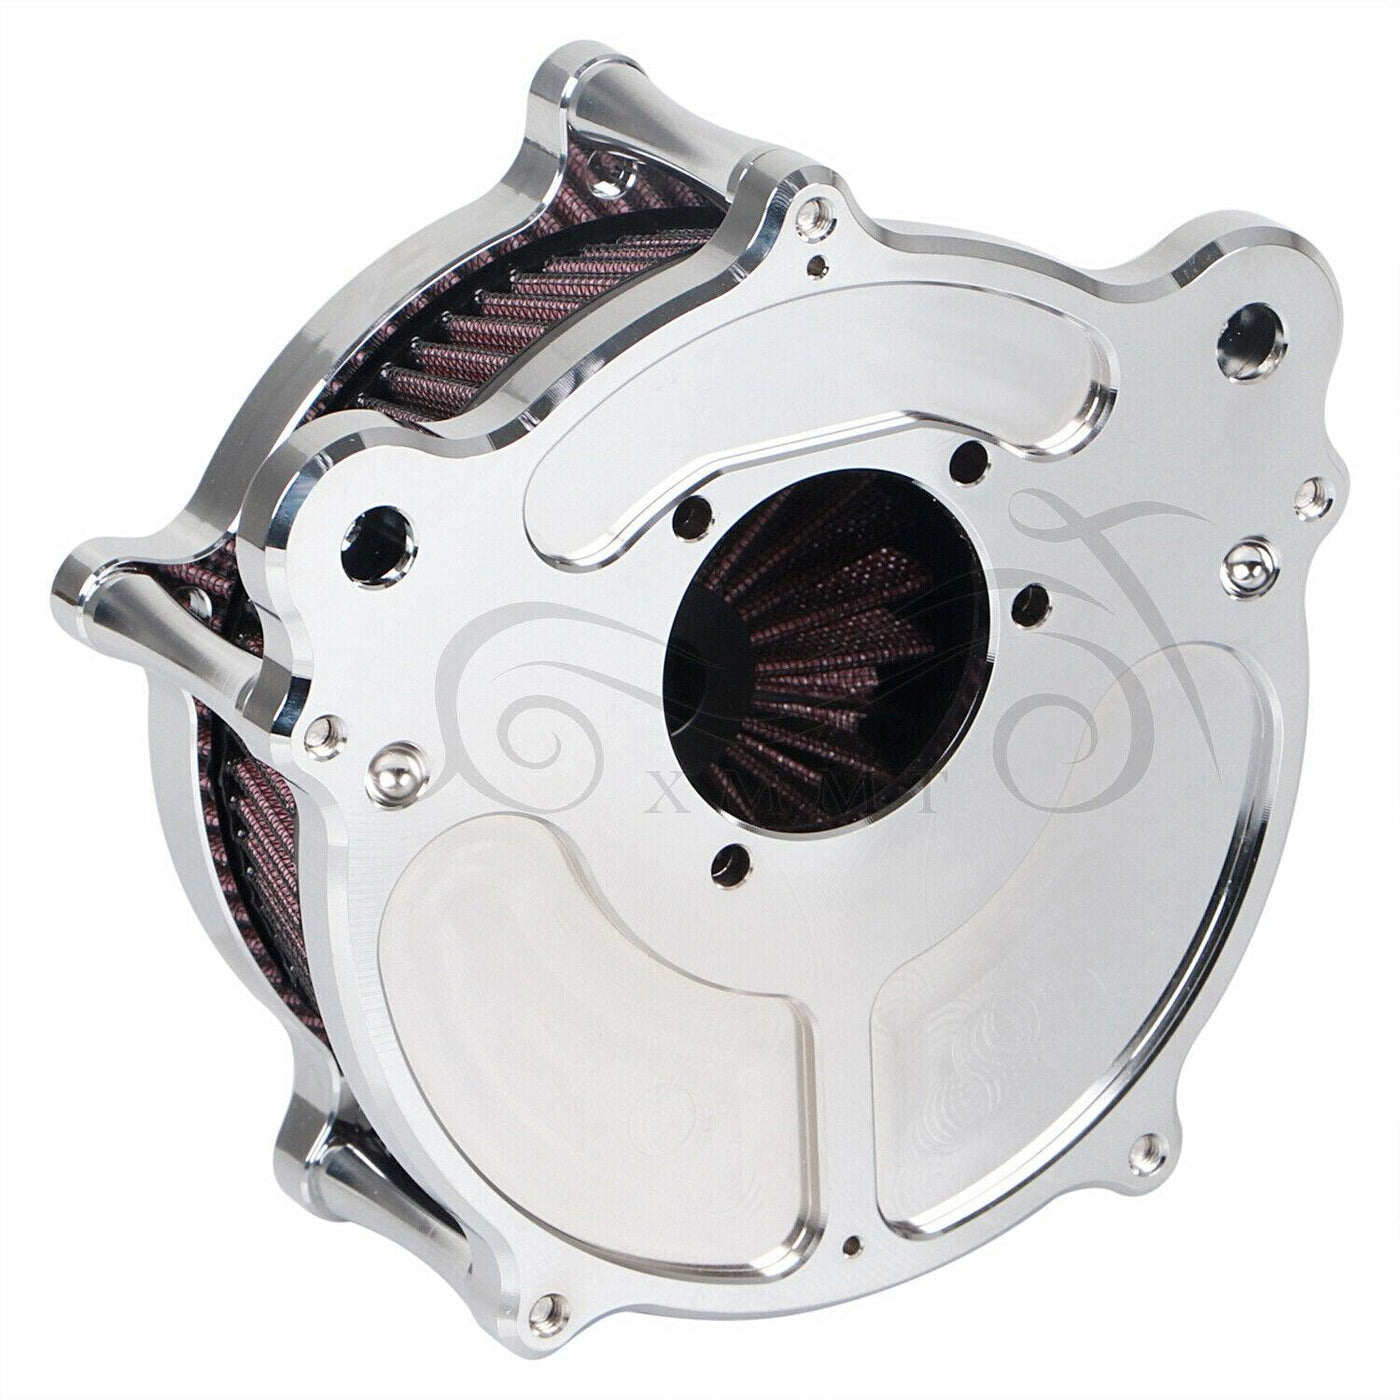 Chrome Air Cleaner Intake Filter For Harley Touring Road King Electra Glide FLHX - Moto Life Products